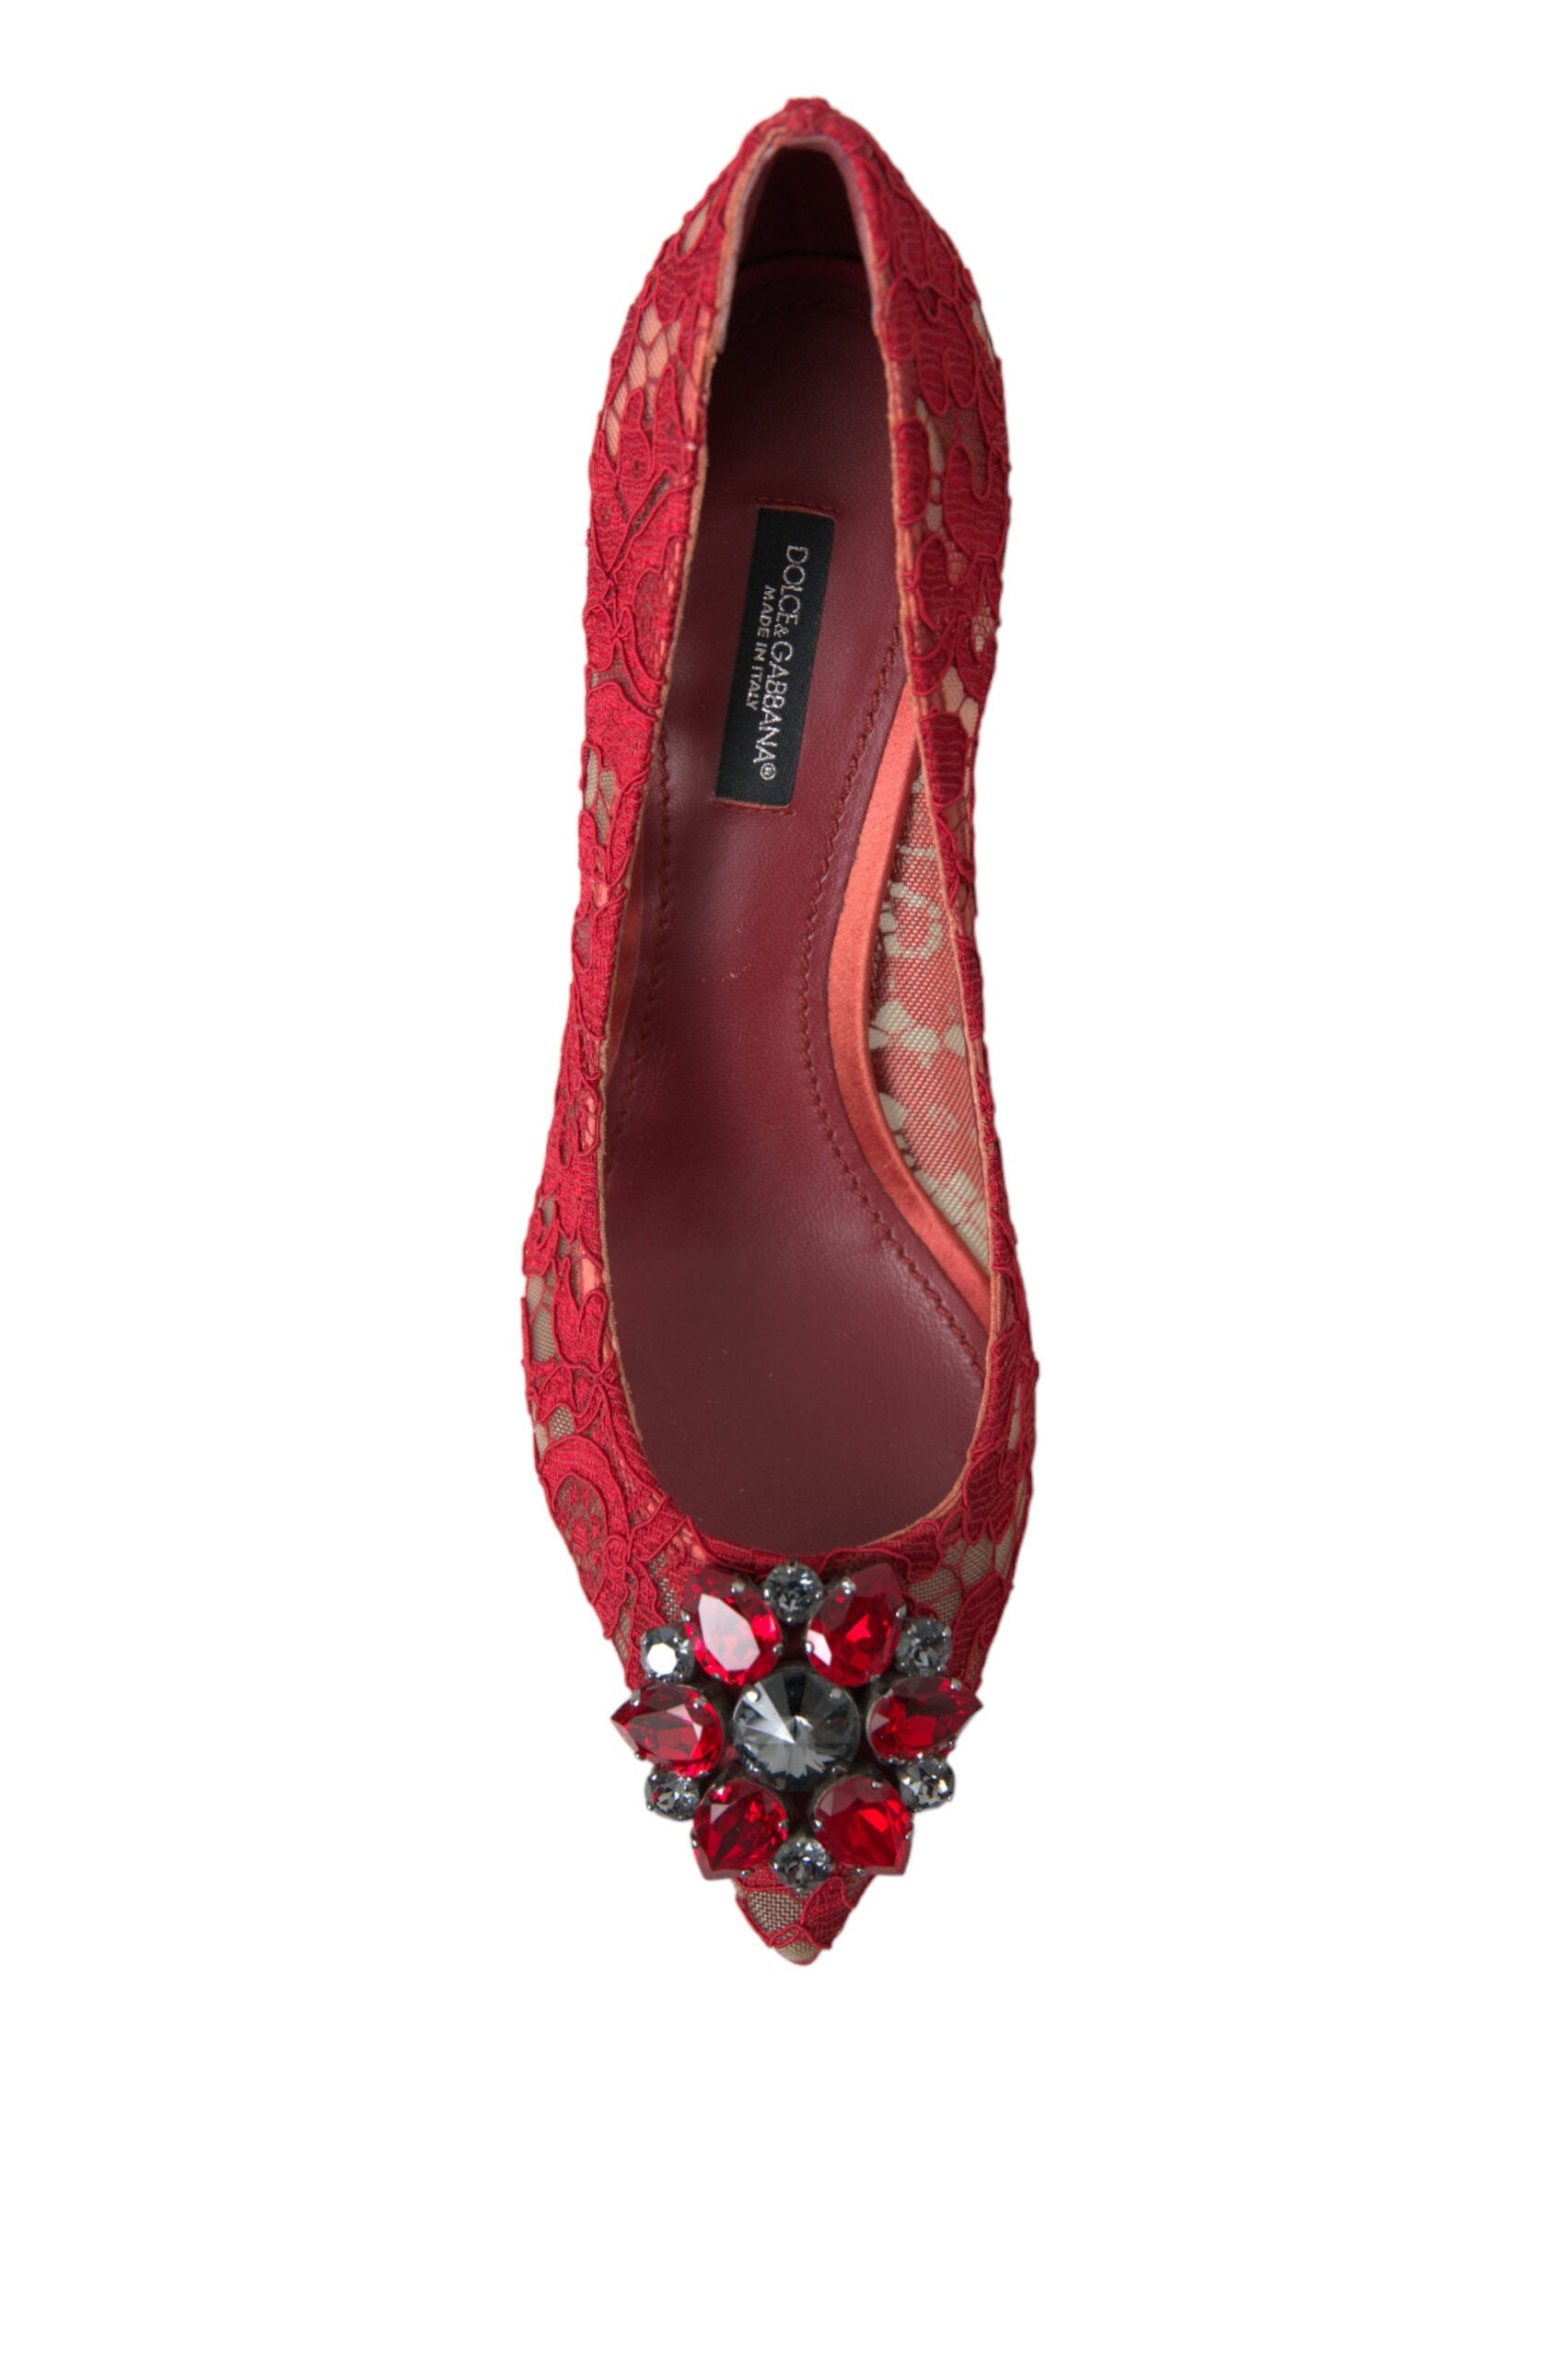 Dolce & Gabbana Red Taormina Lace Crystal Heels Pumps Shoes GENUINE AUTHENTIC BRAND LLC